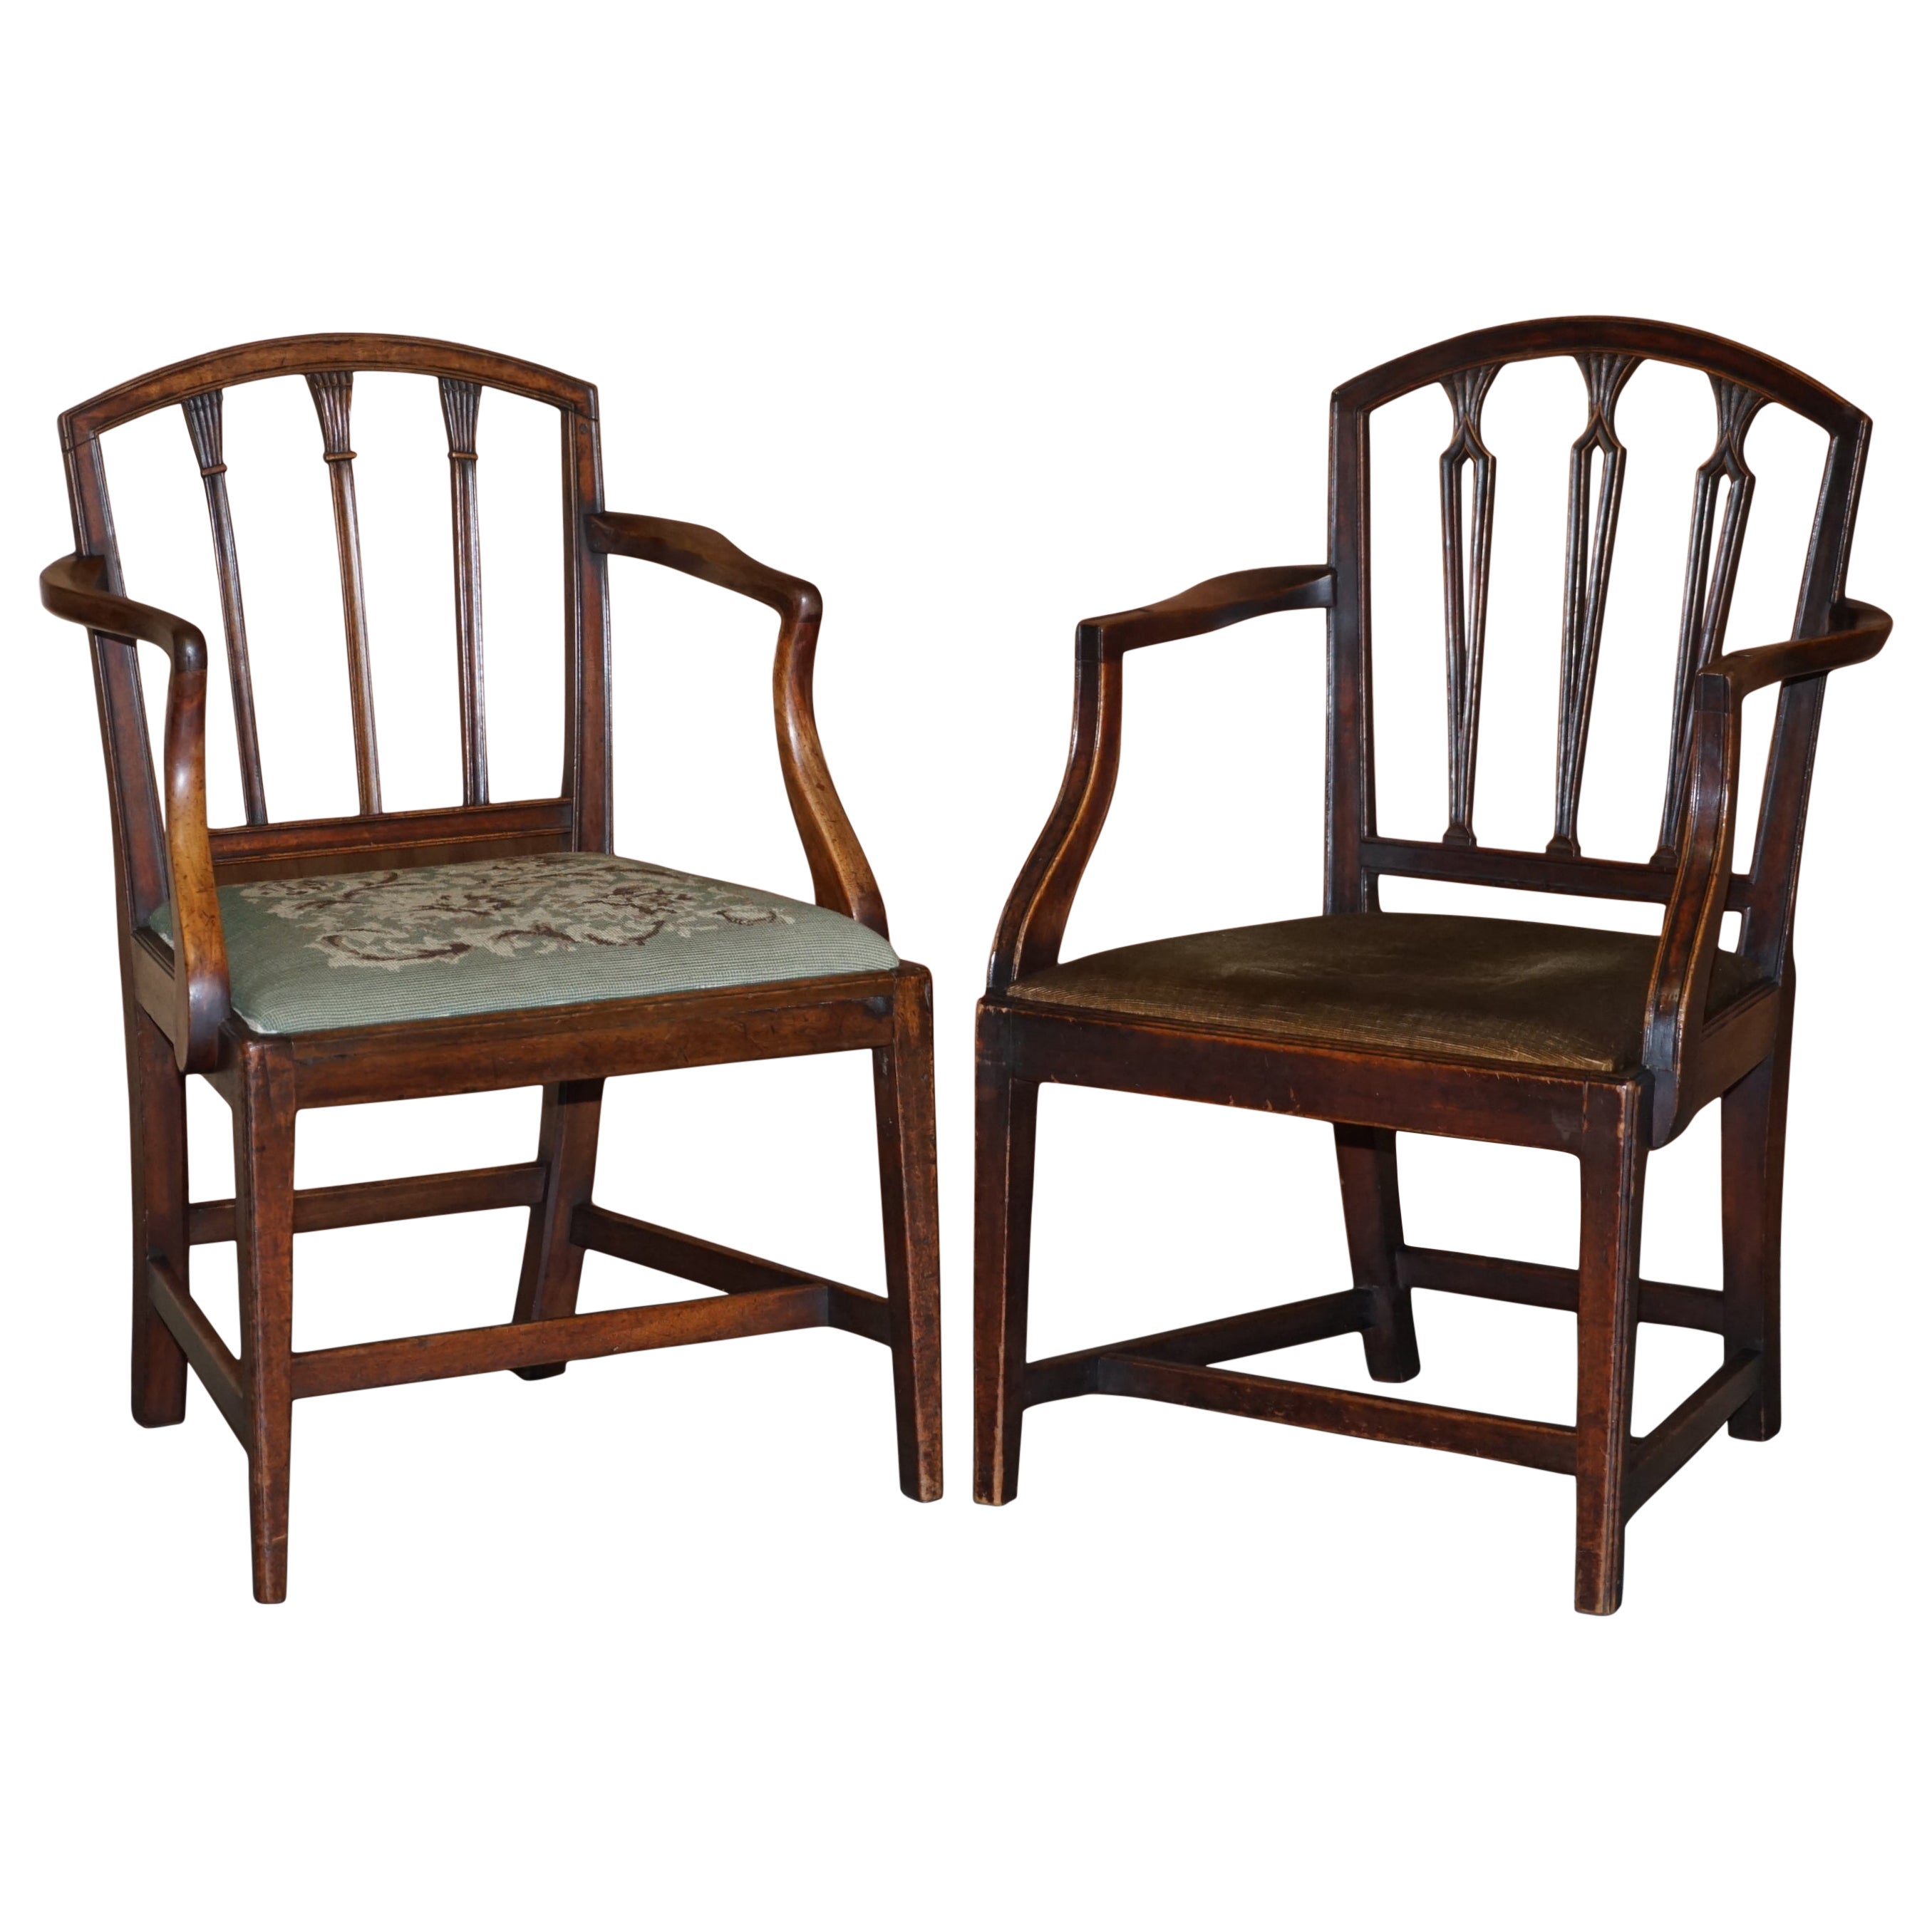 Antique Pair of Georgian Carved Armchairs circa 1780 Lovely Carvings Throughout For Sale